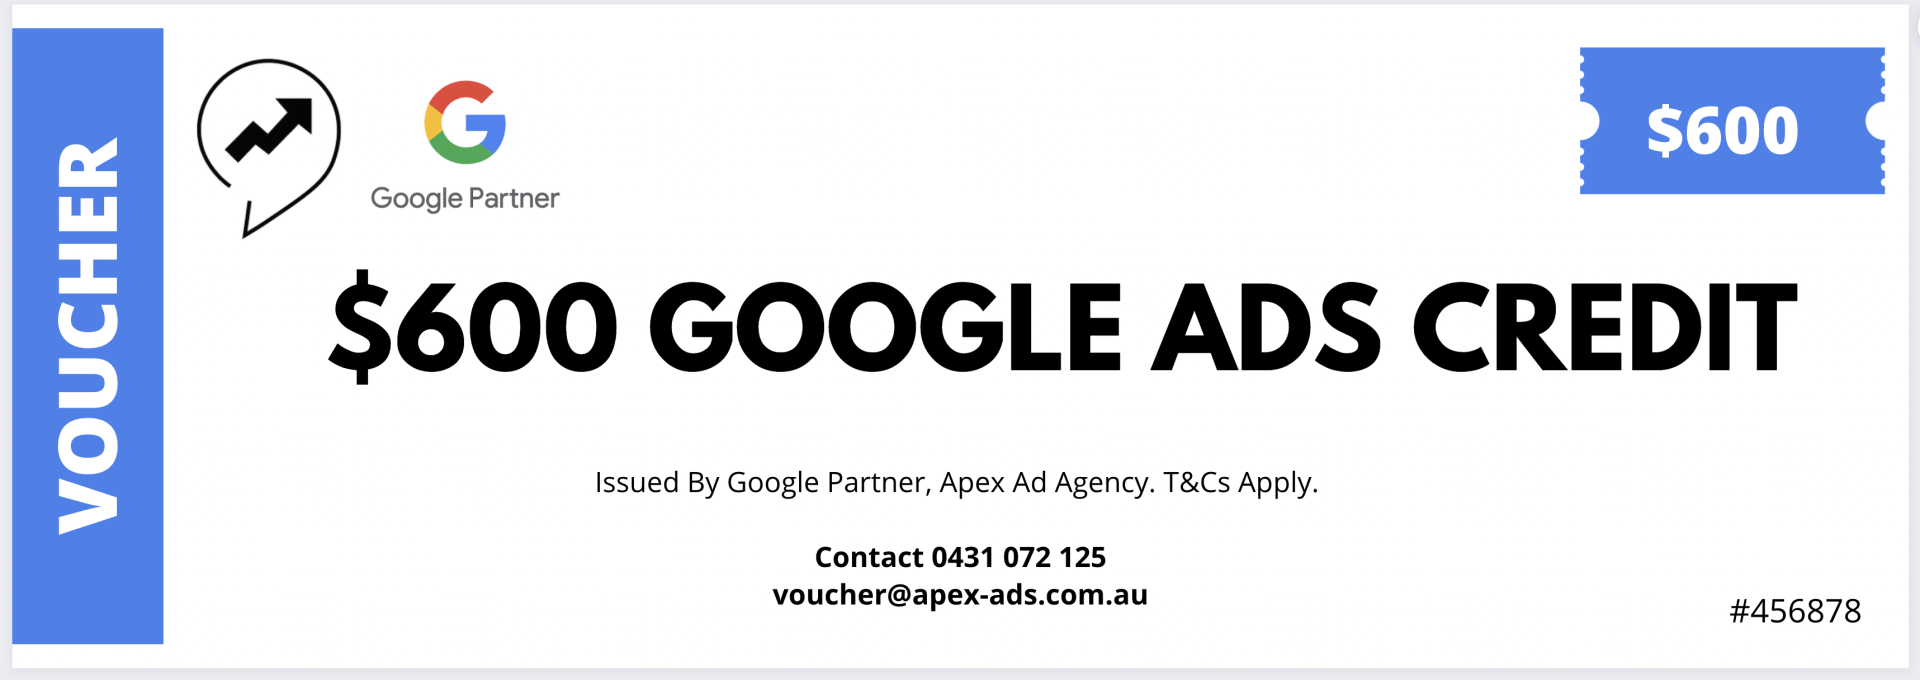 Exploring the impact of Google Ads credit - Apex Ad Agency maximises opportunities for online growth.